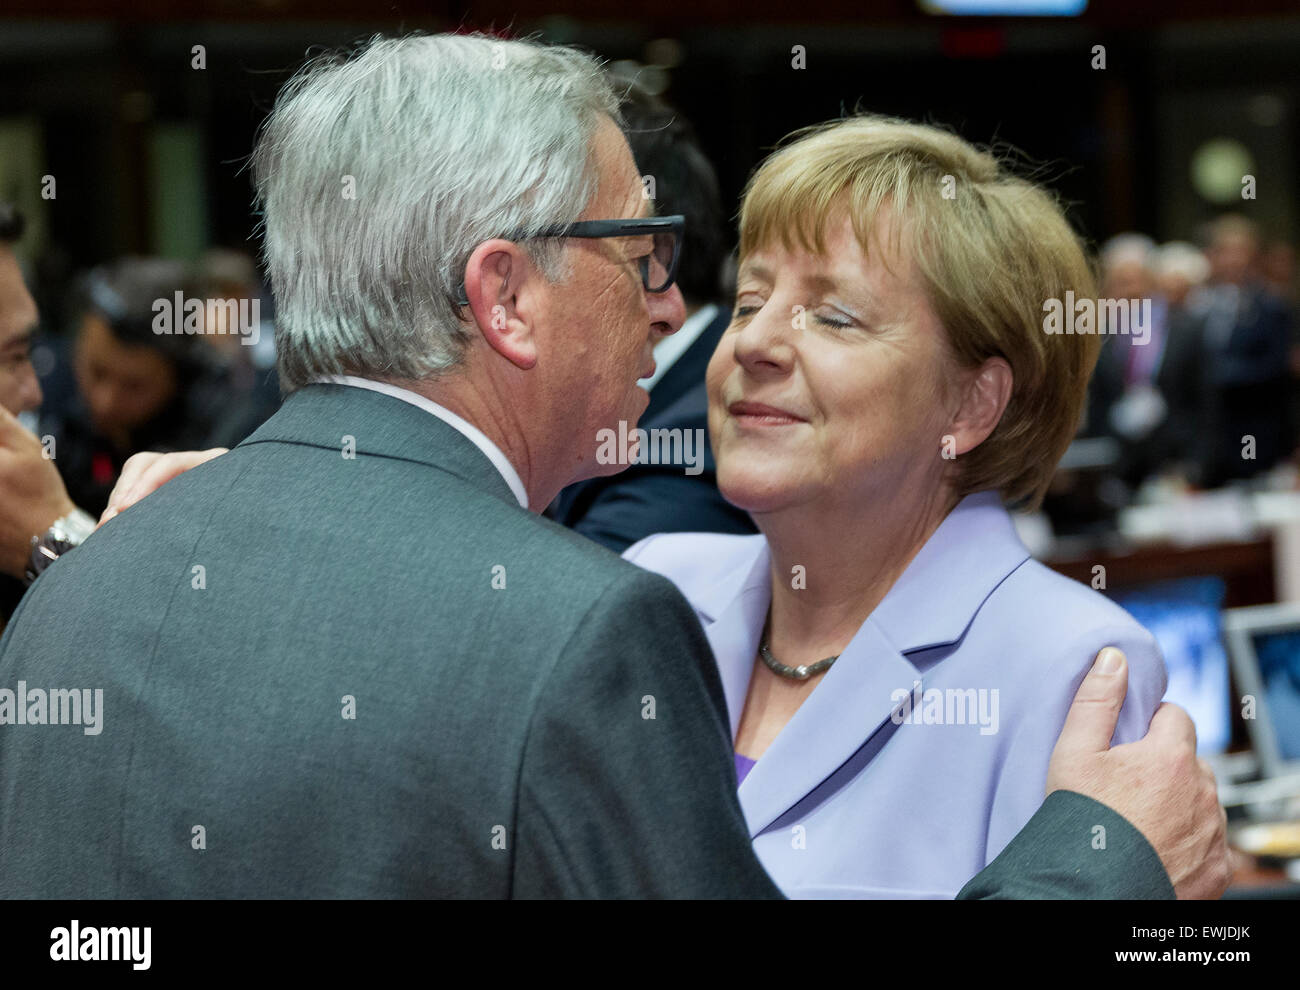 Jean Claude Juncker L High Resolution Stock Photography and Images - Alamy